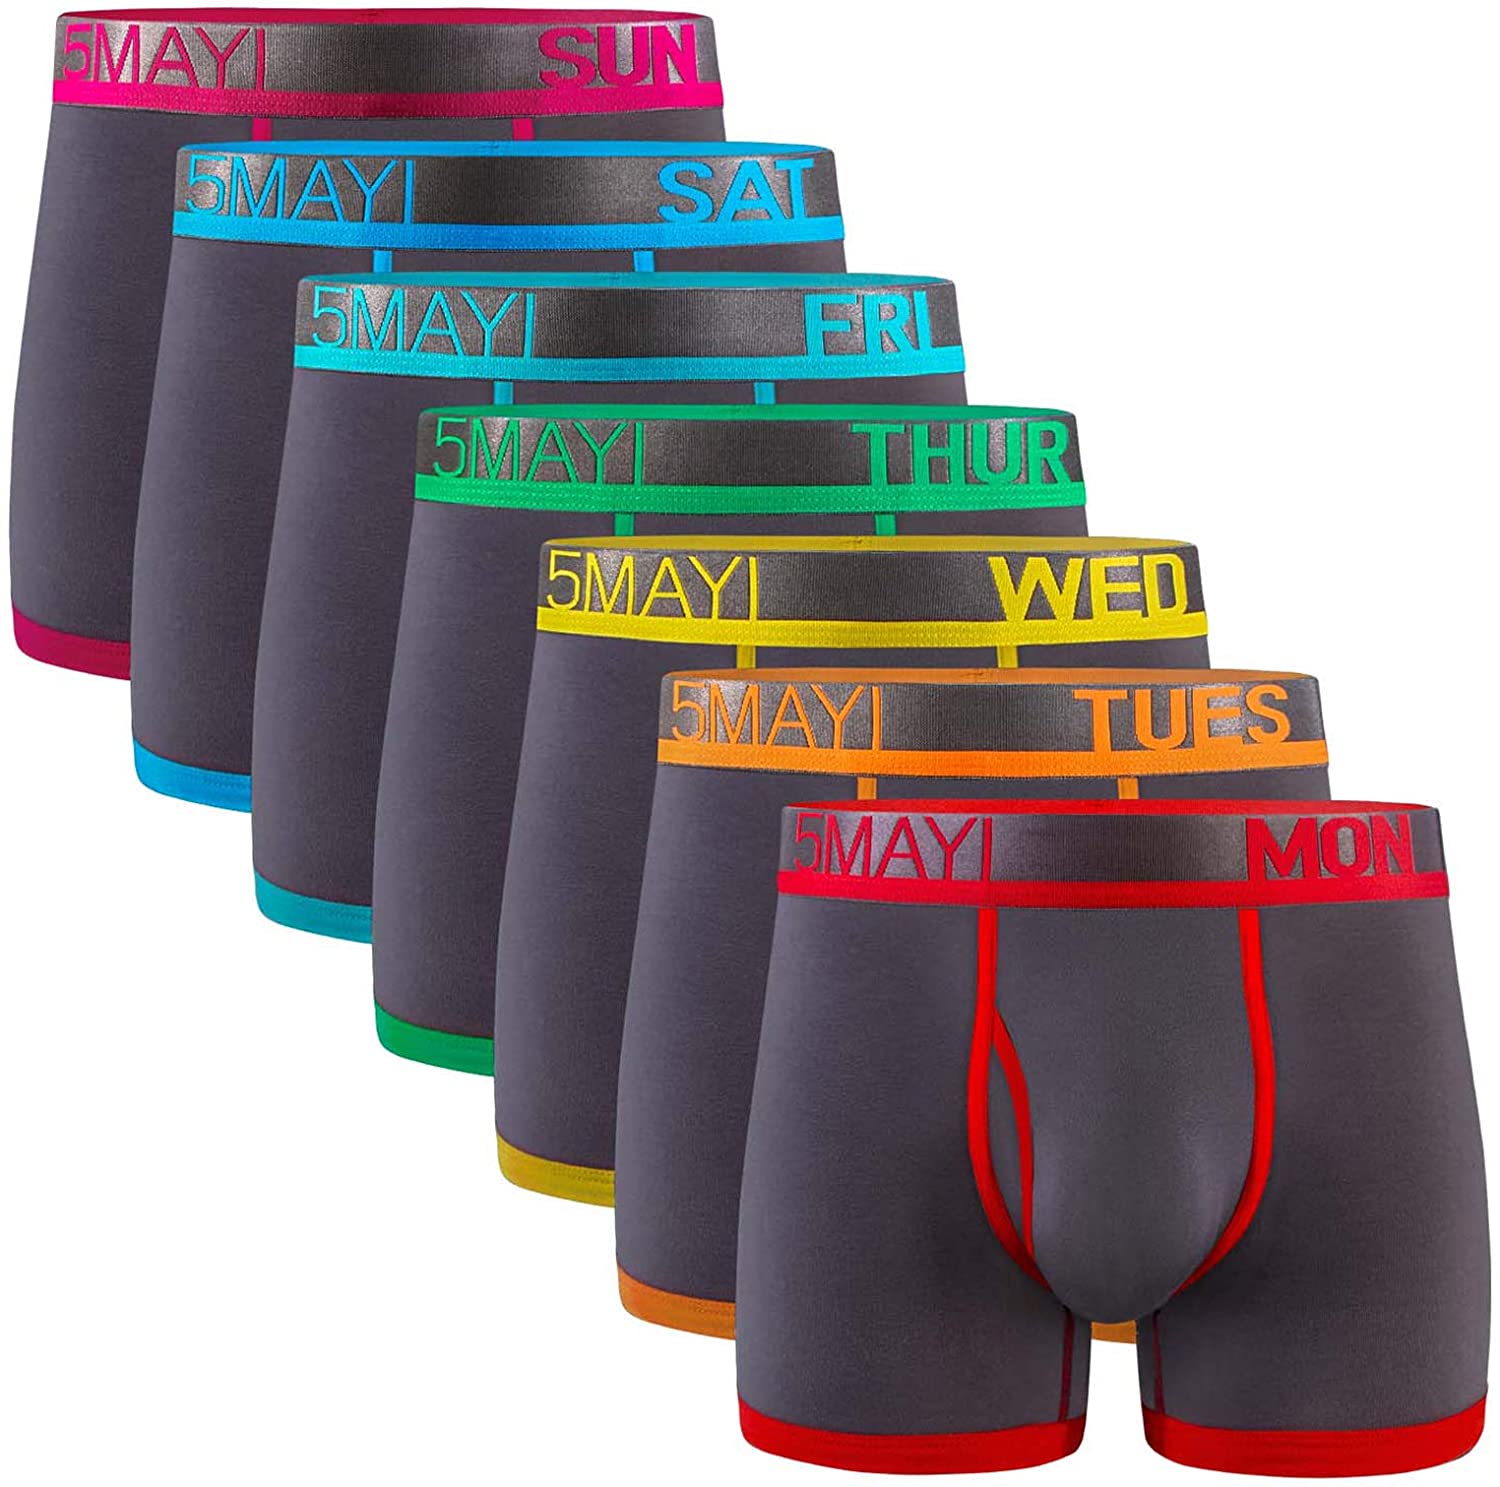 5Mayi Mens Underwear Boxer Briefs for Men Cotton Men's Boxer Briefs Black  Pack of 5 S at  Men's Clothing store